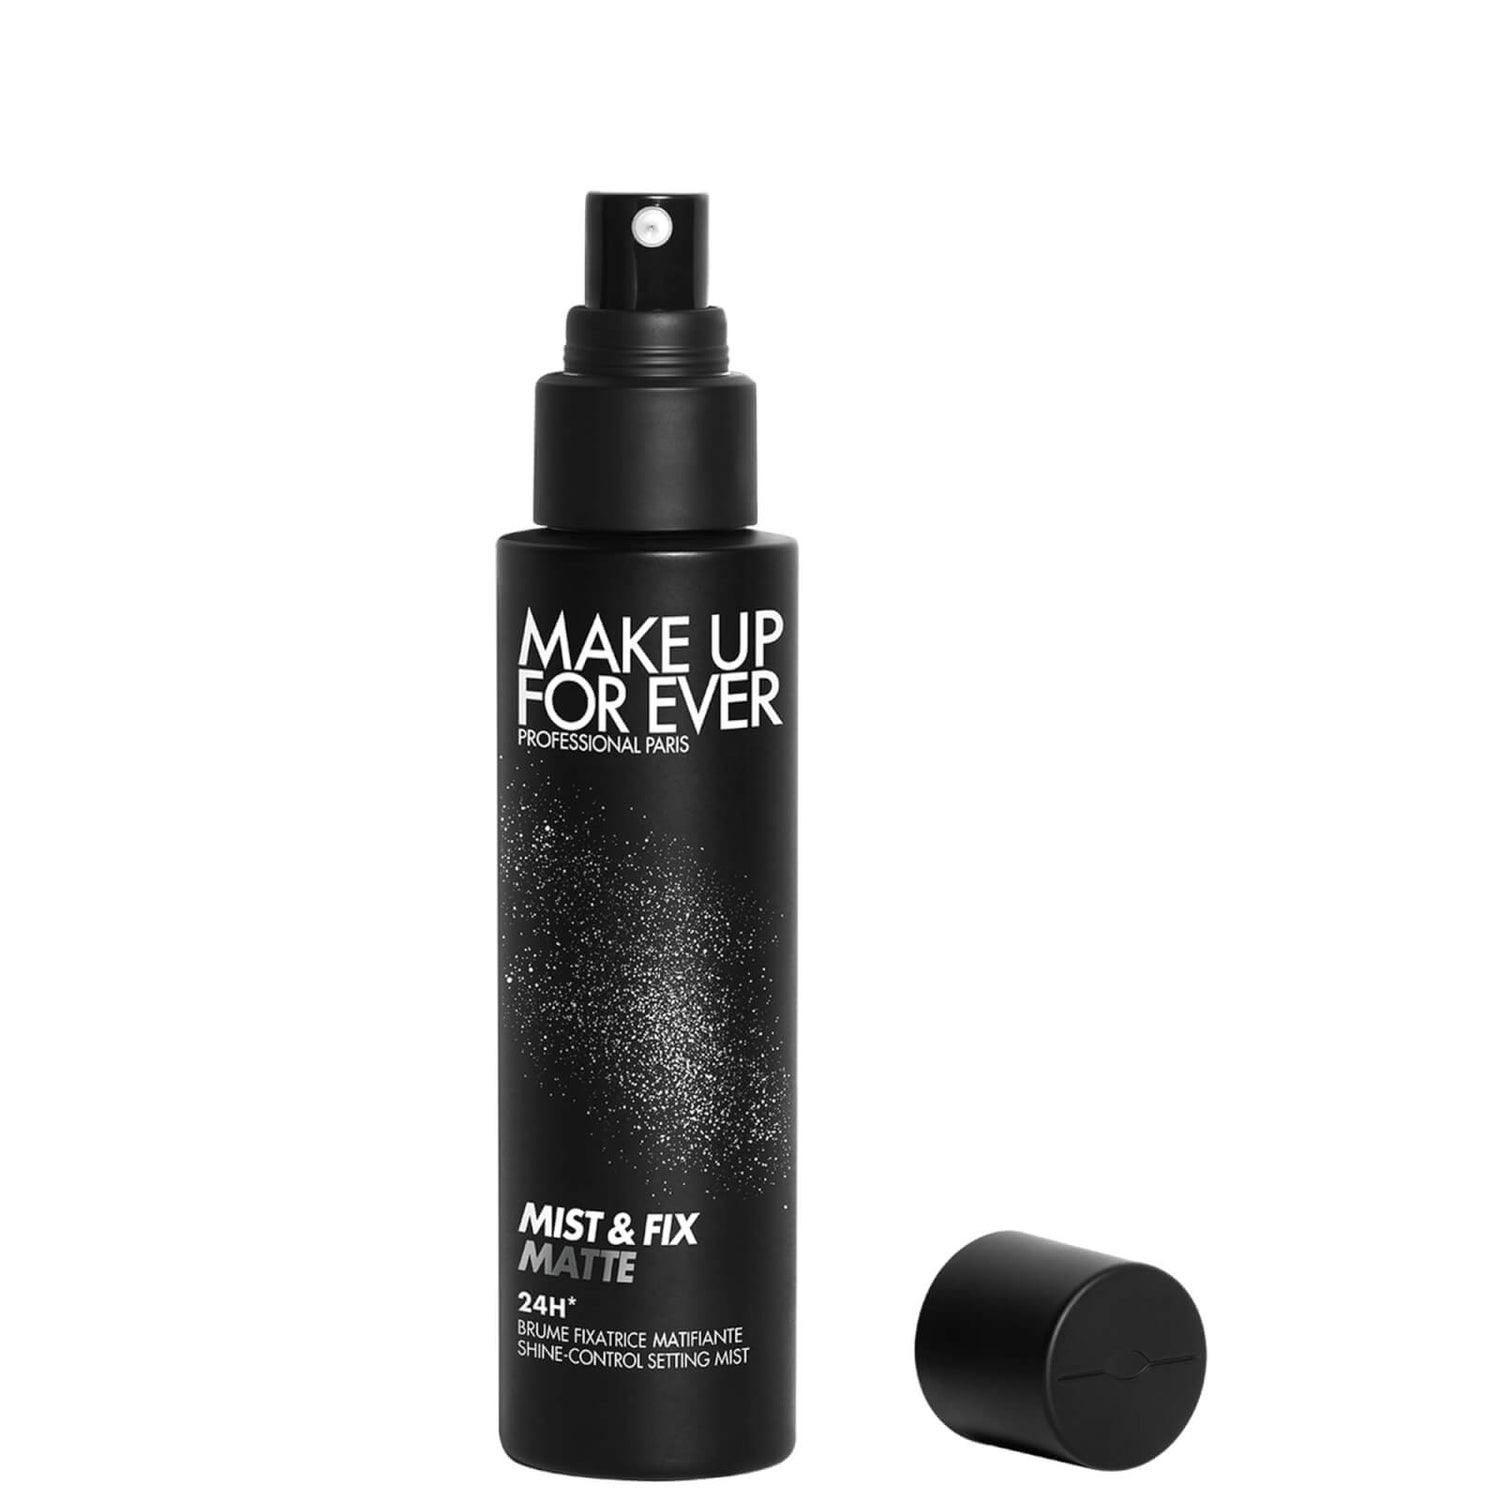 MAKE UP FOR EVER Mist and Fix Matte-23 Spray 100ml